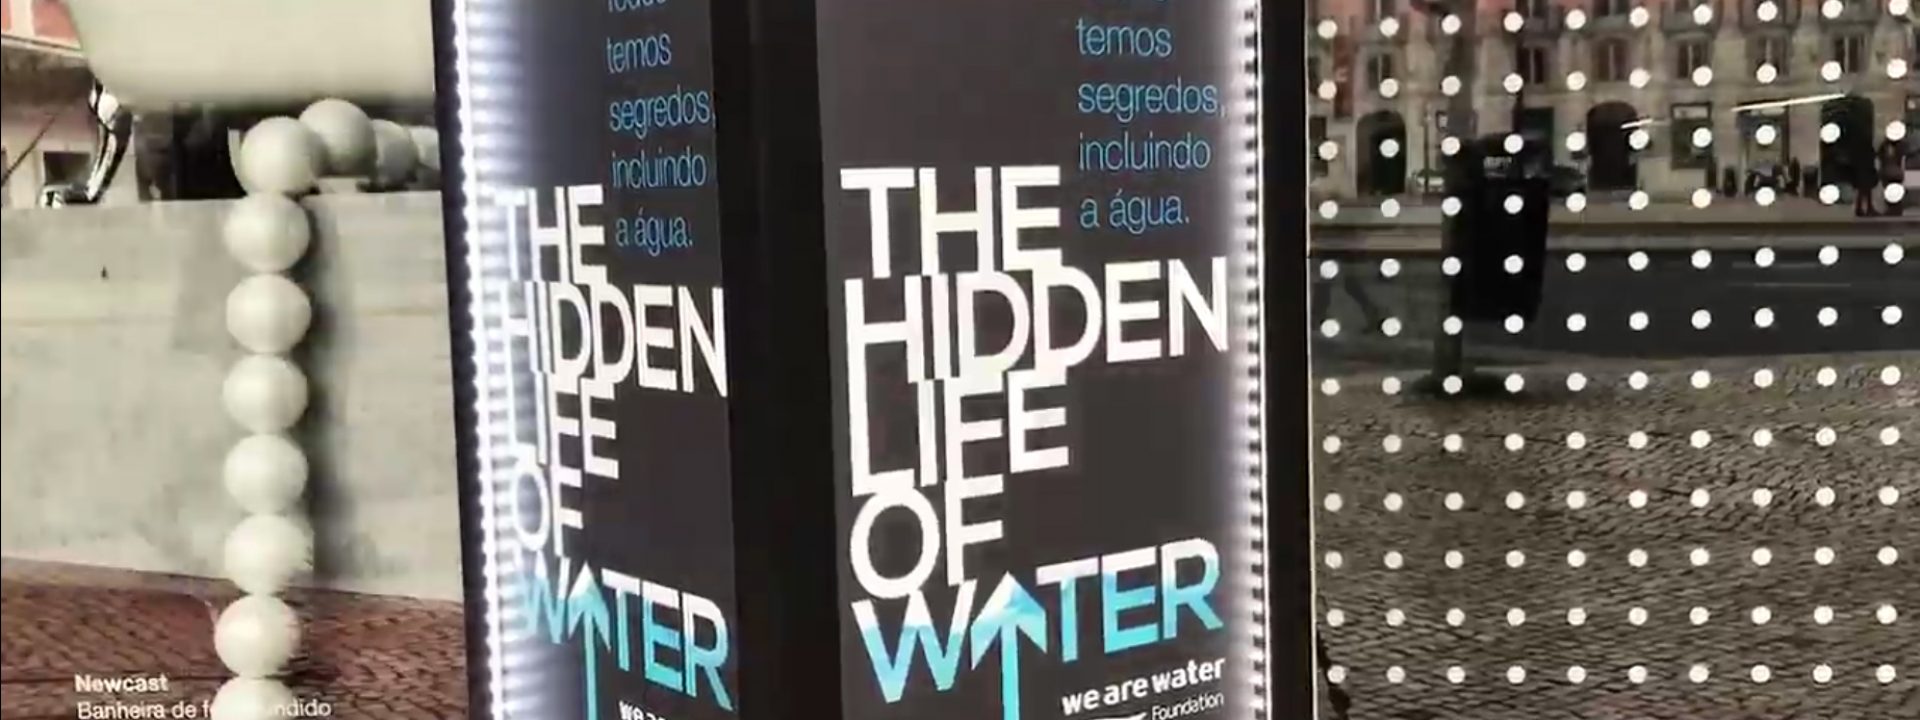 The hidden life of water does appear in the photo